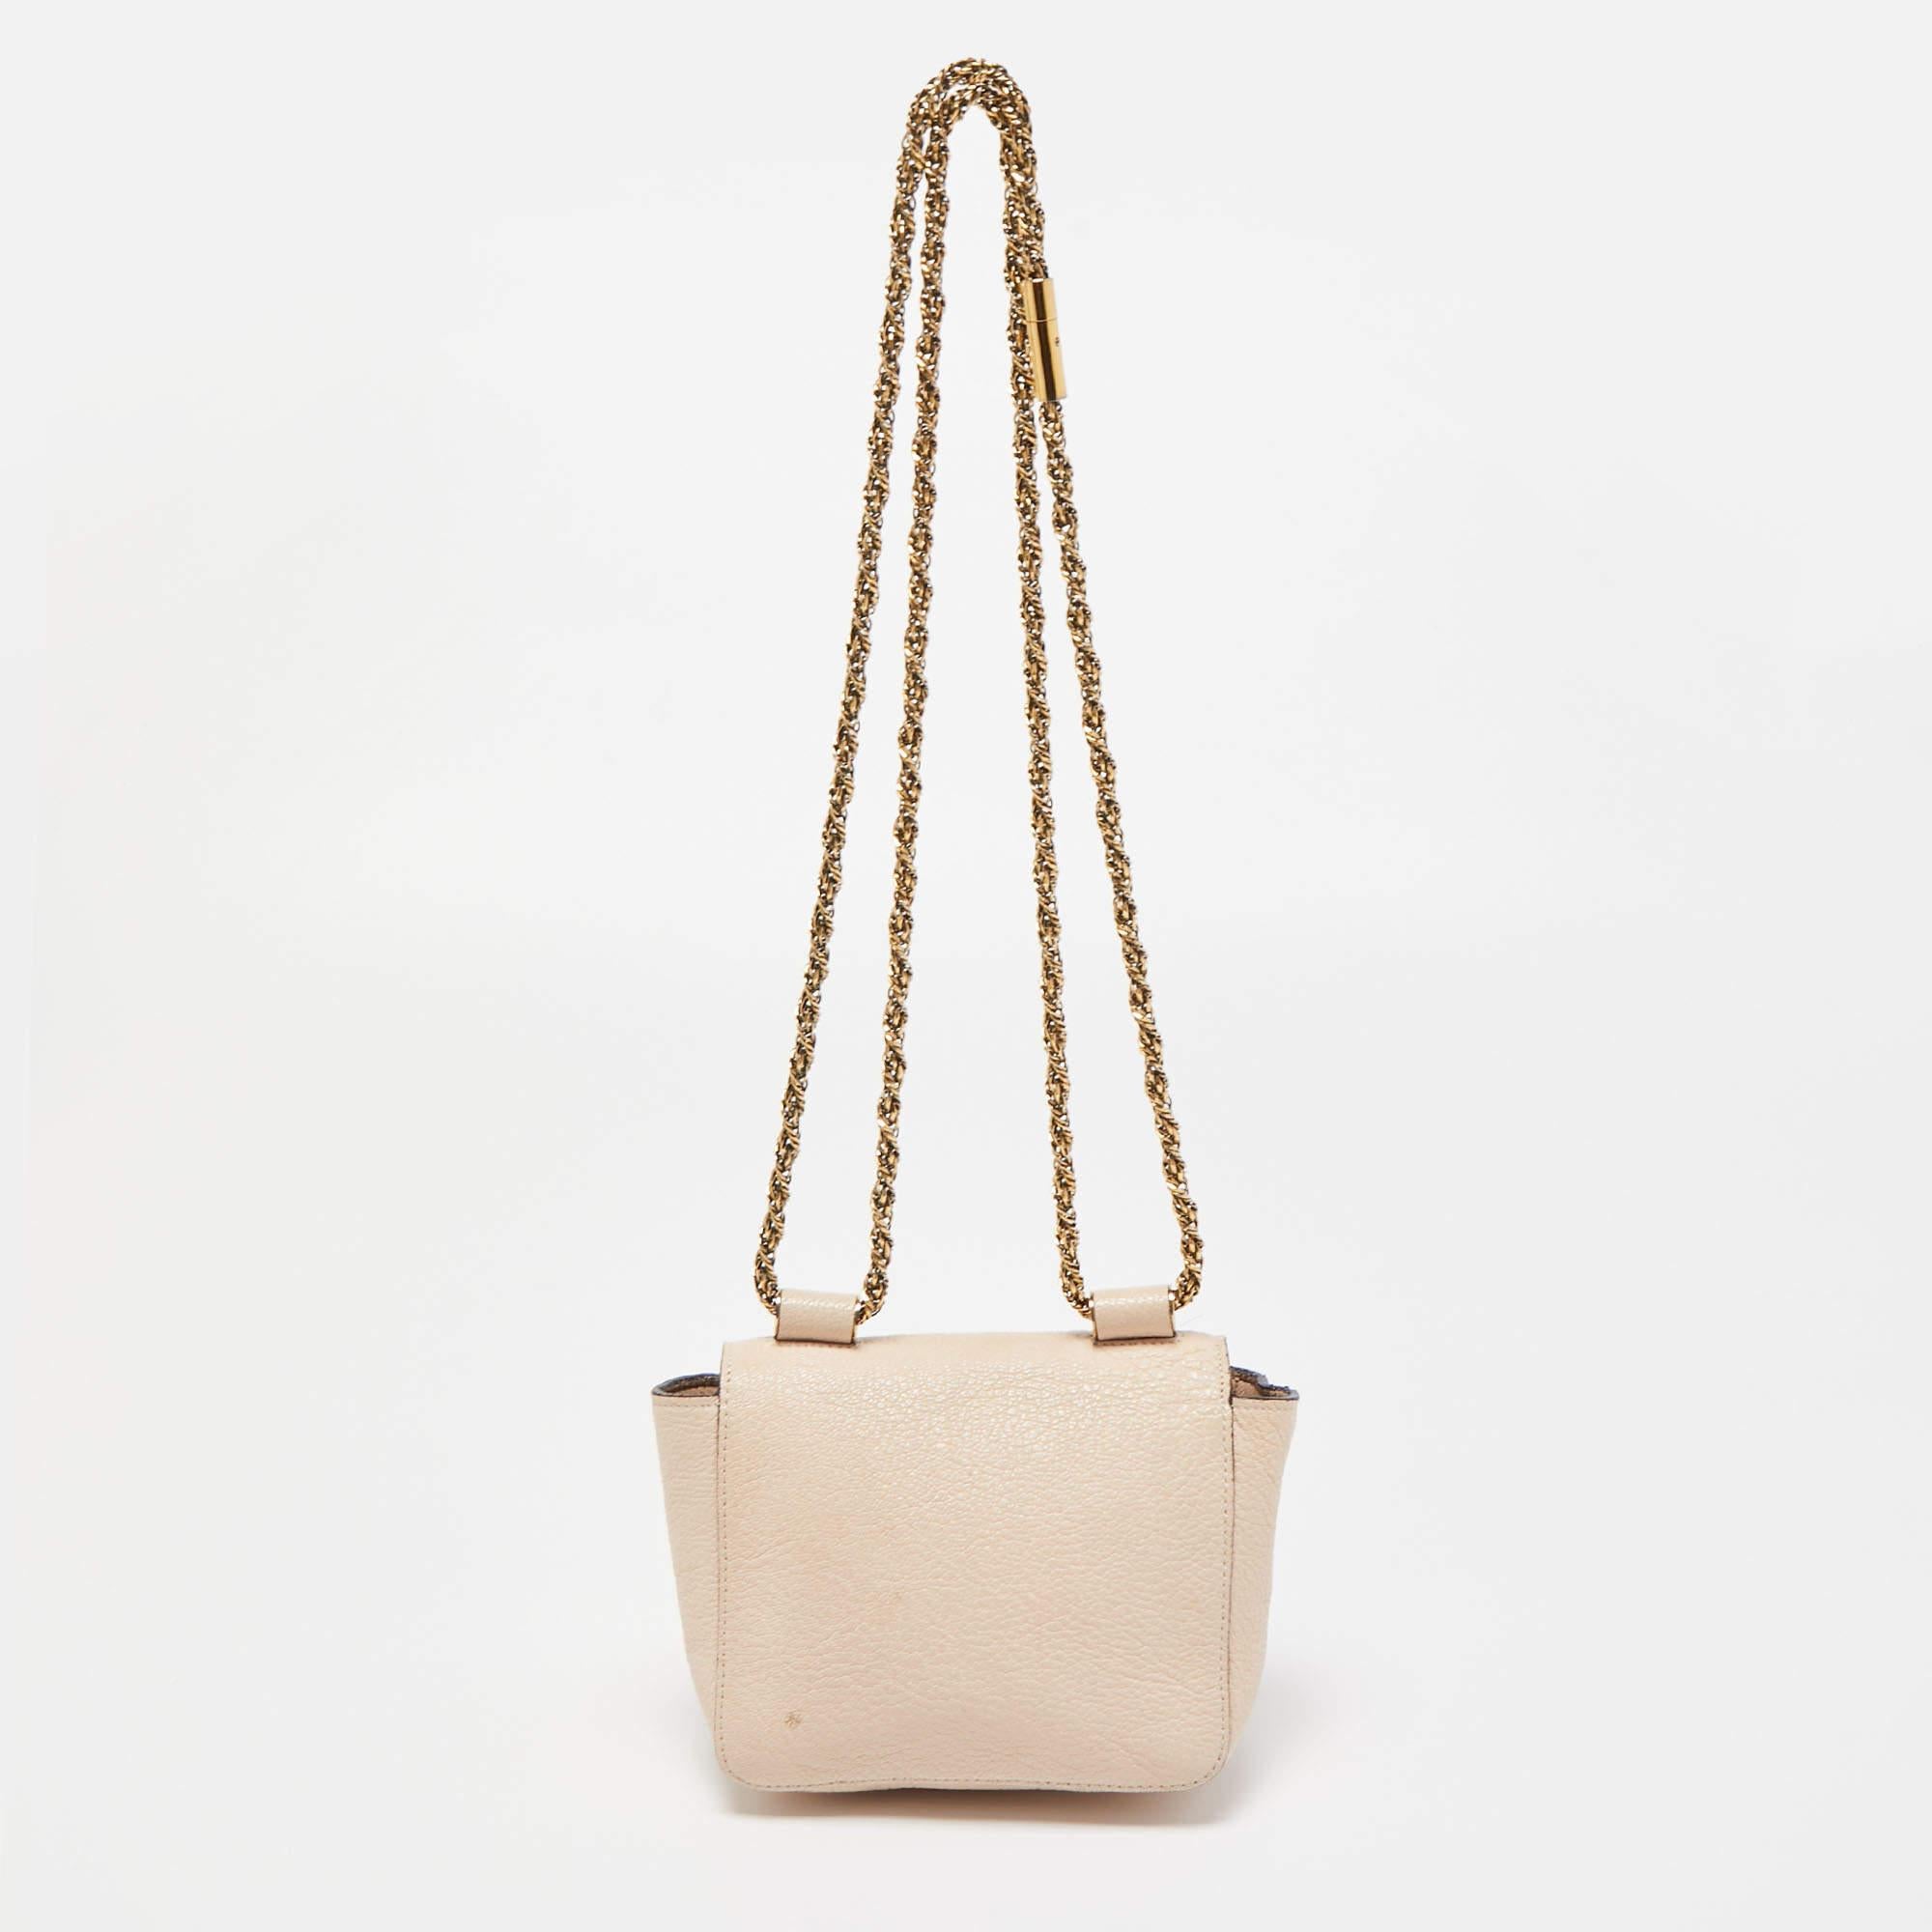 The simple silhouette and the use of durable materials for the exterior bring out the appeal of this Chloe Elsie crossbody bag for women. It features a chain link and a well-lined interior.

Includes: Original Dustbag